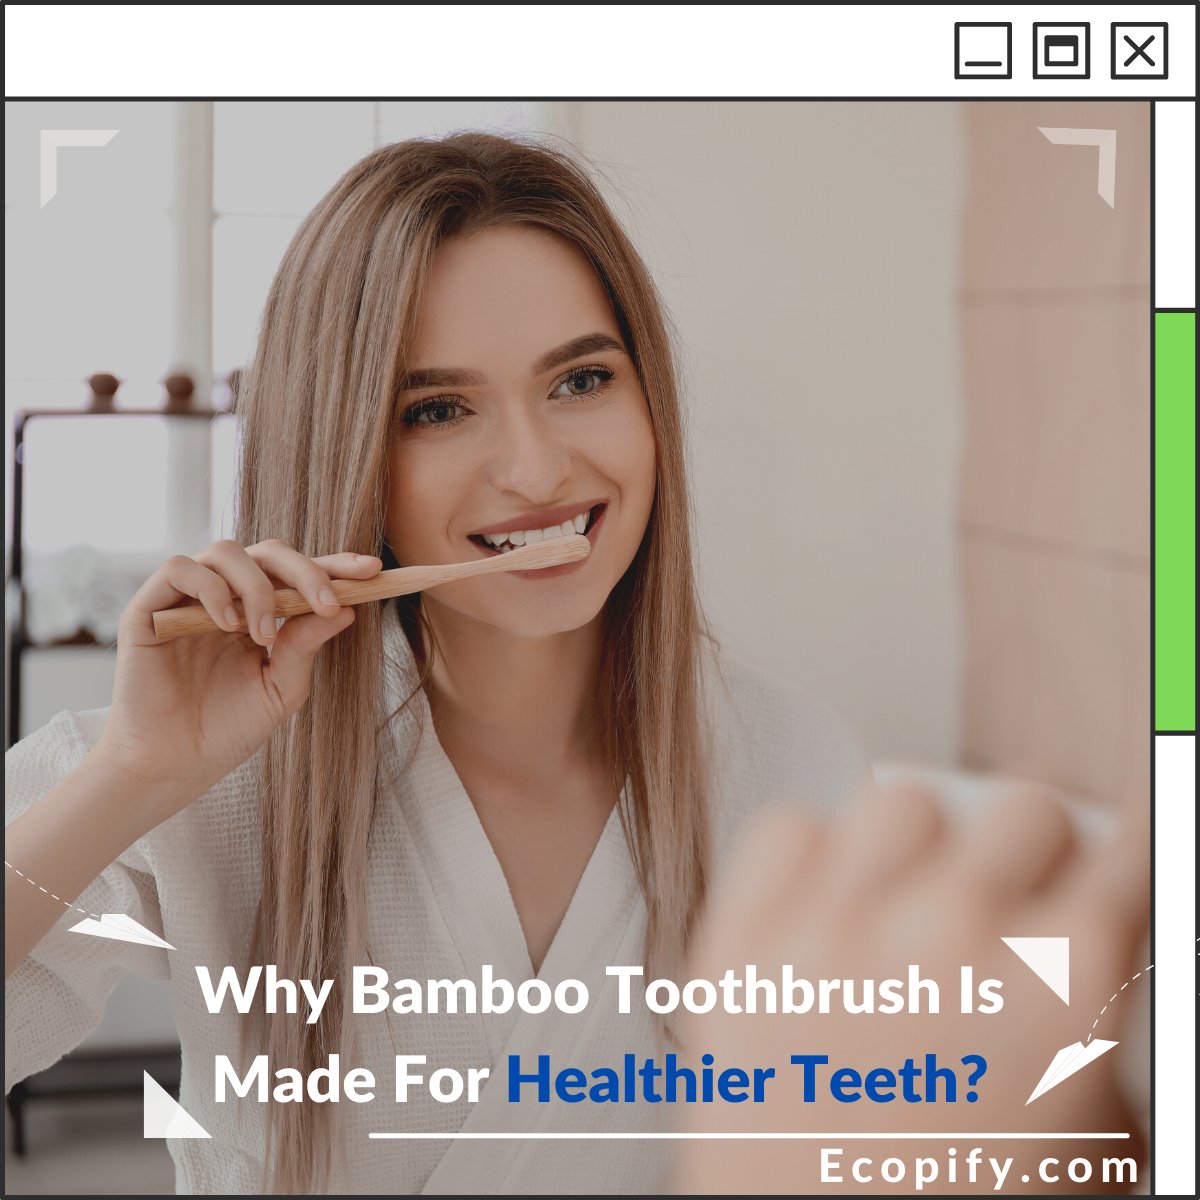 Why Bamboo Toothbrush Is Made For Healthier Teeth?